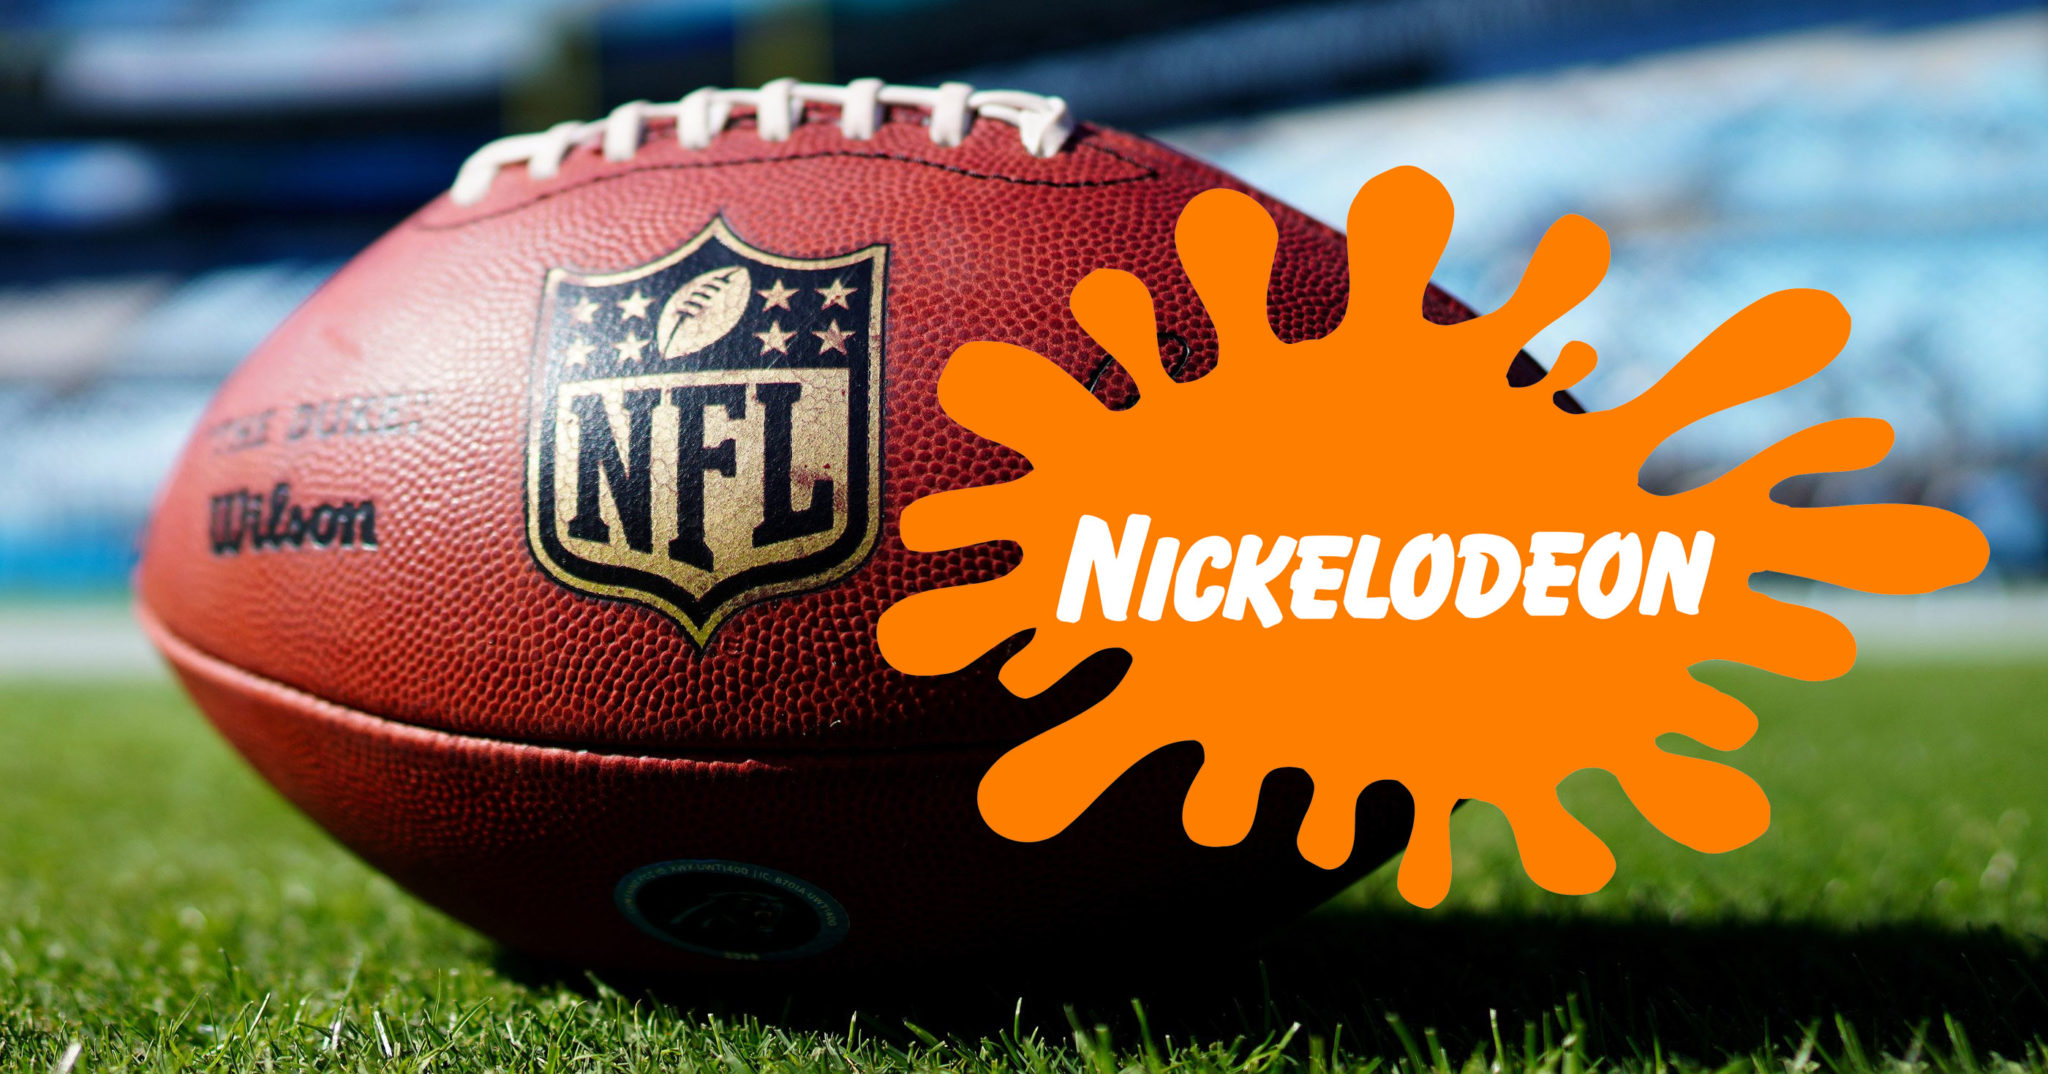 NFL To Broadcast Playoff Game On Nickelodeon With Announcers & Graphics